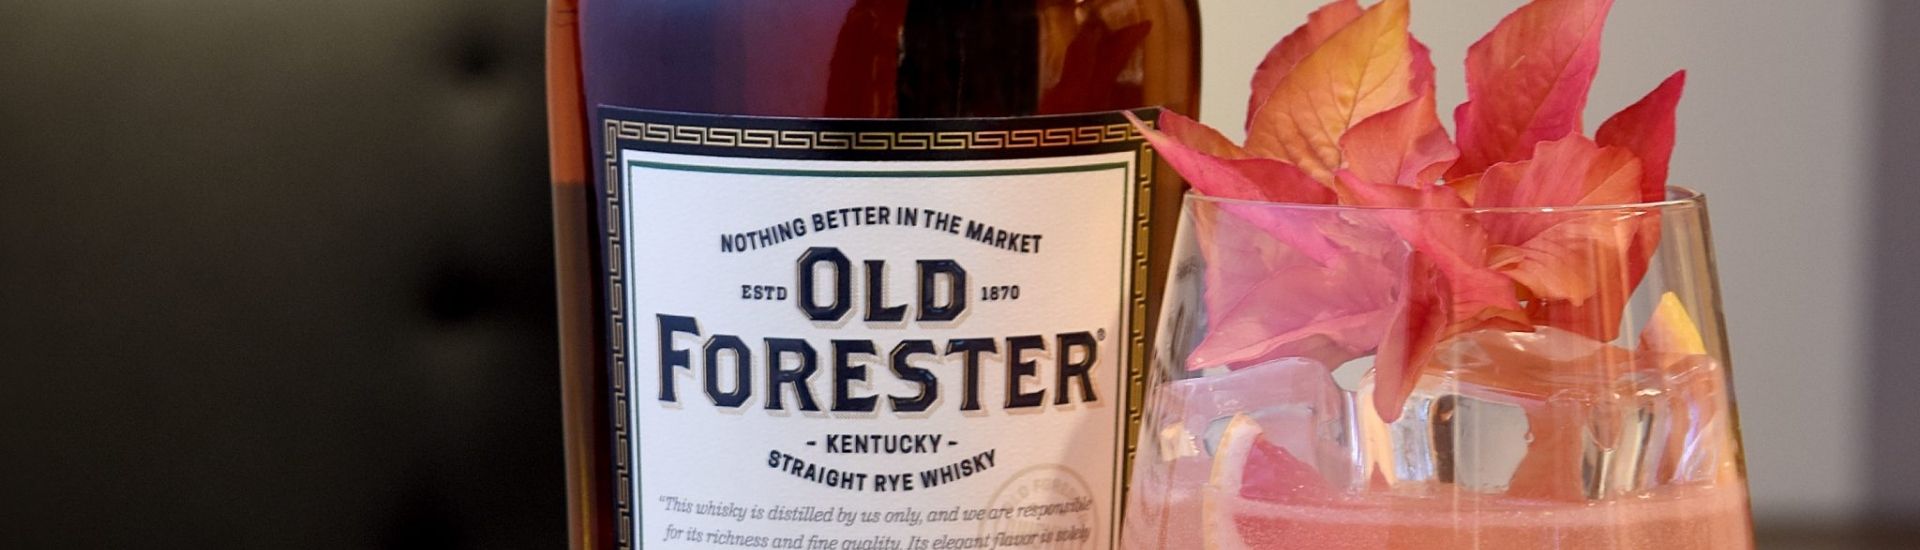 old forester bourbon with glass